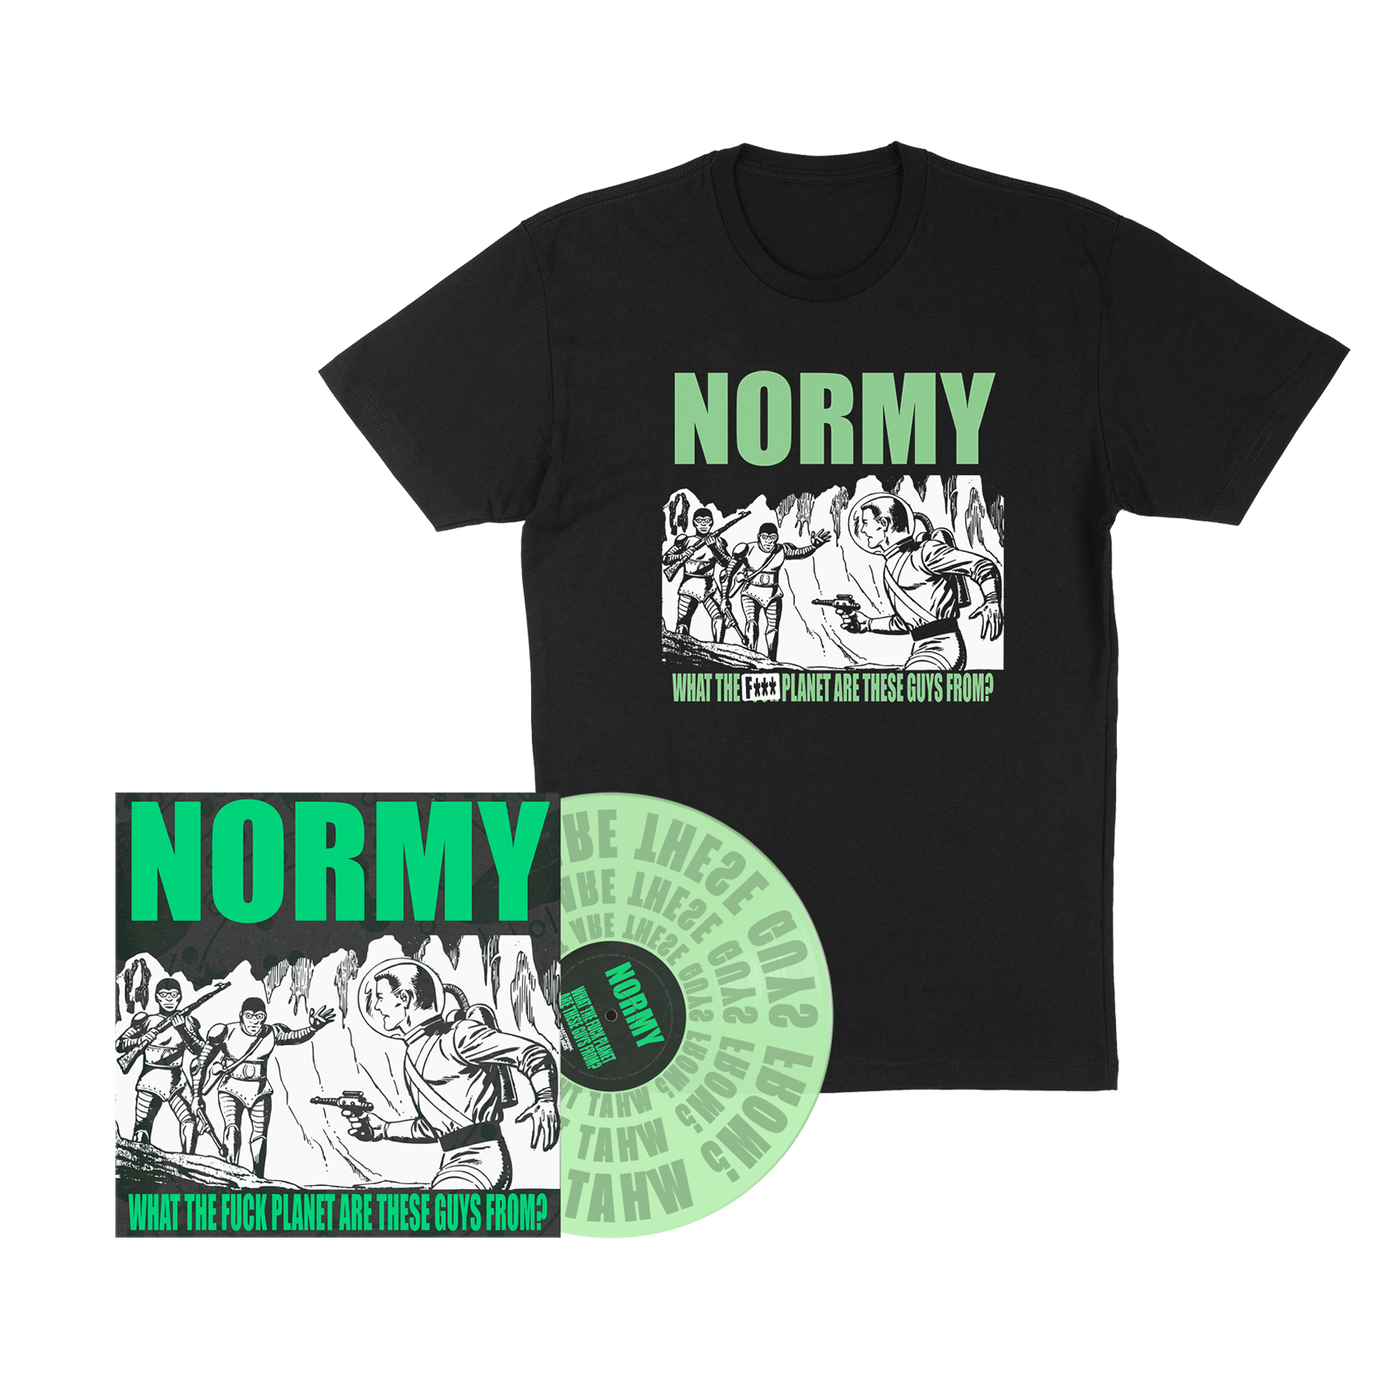 NORMY - What The Fuck Planet Are These Guys From? LP + Shirt